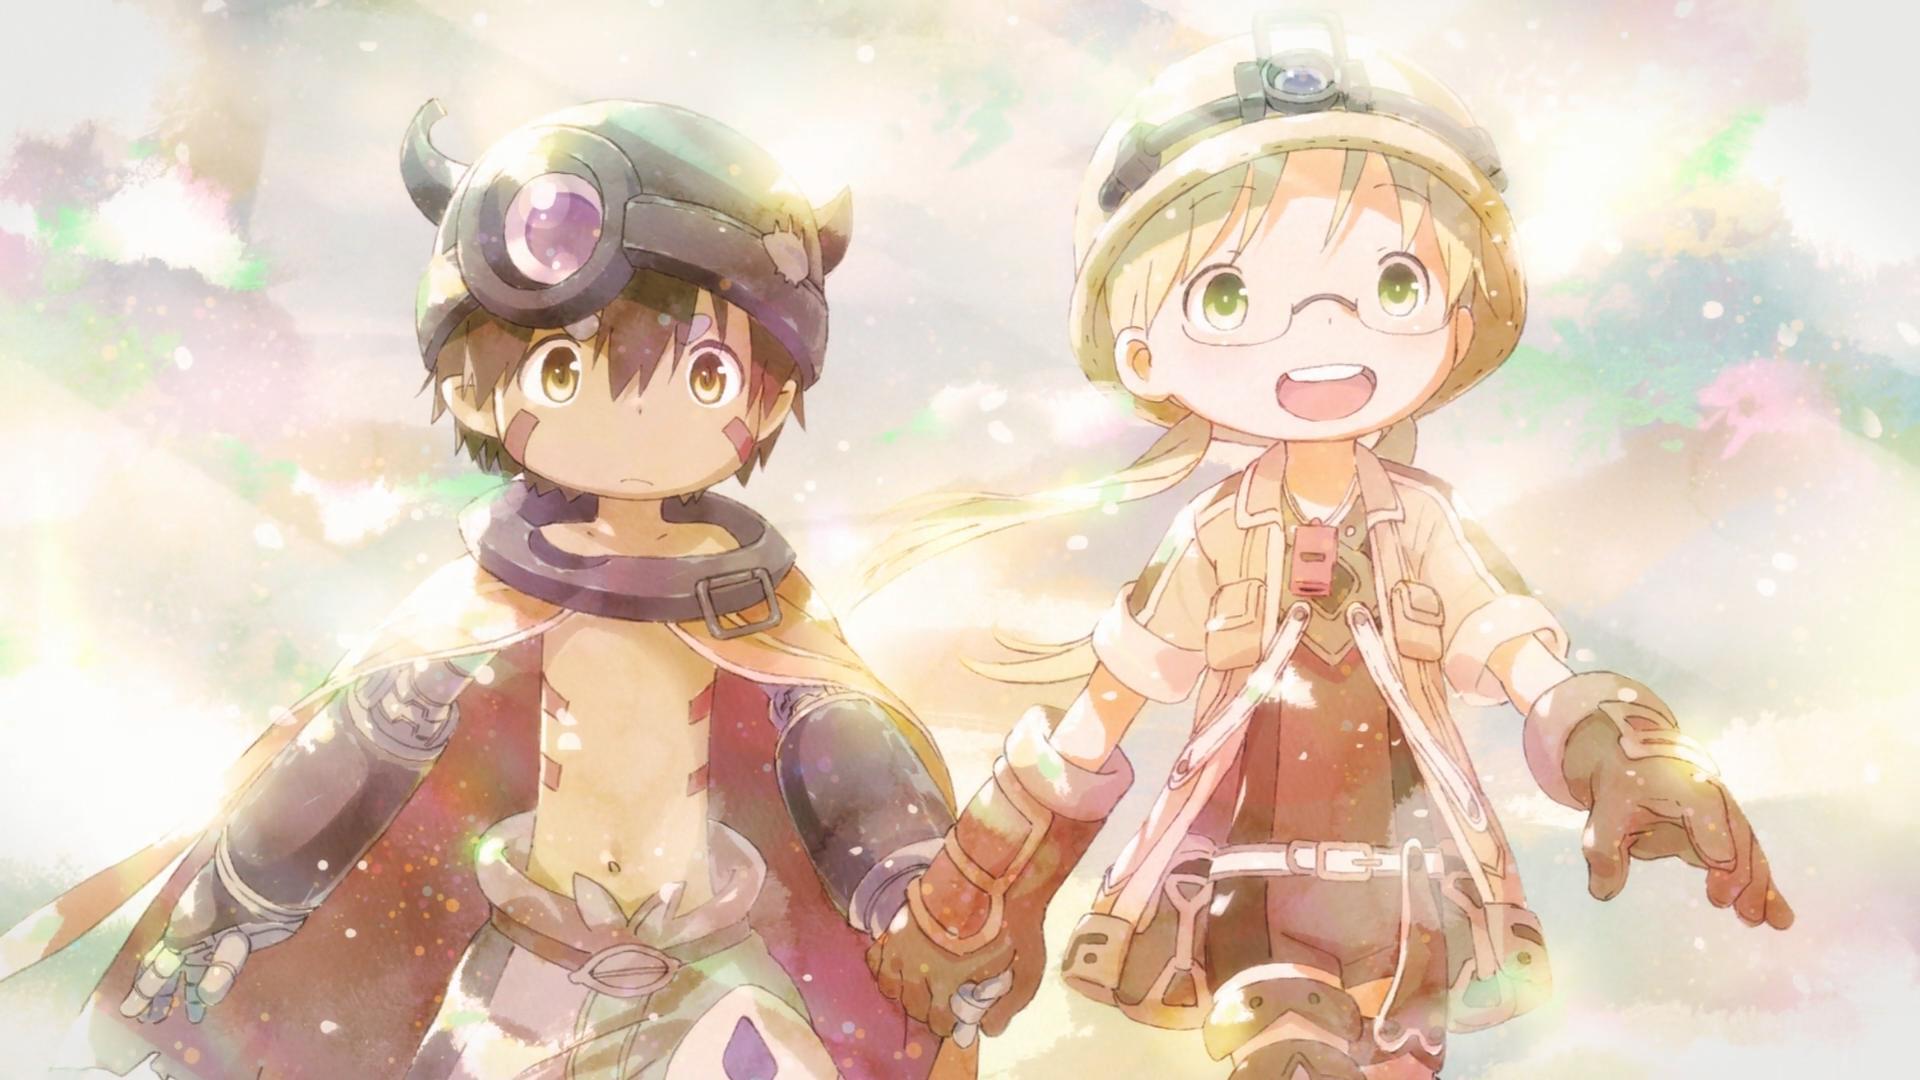 Wallpaper, Made in Abyss, Regu Made in Abyss, Riko Made in Abyss